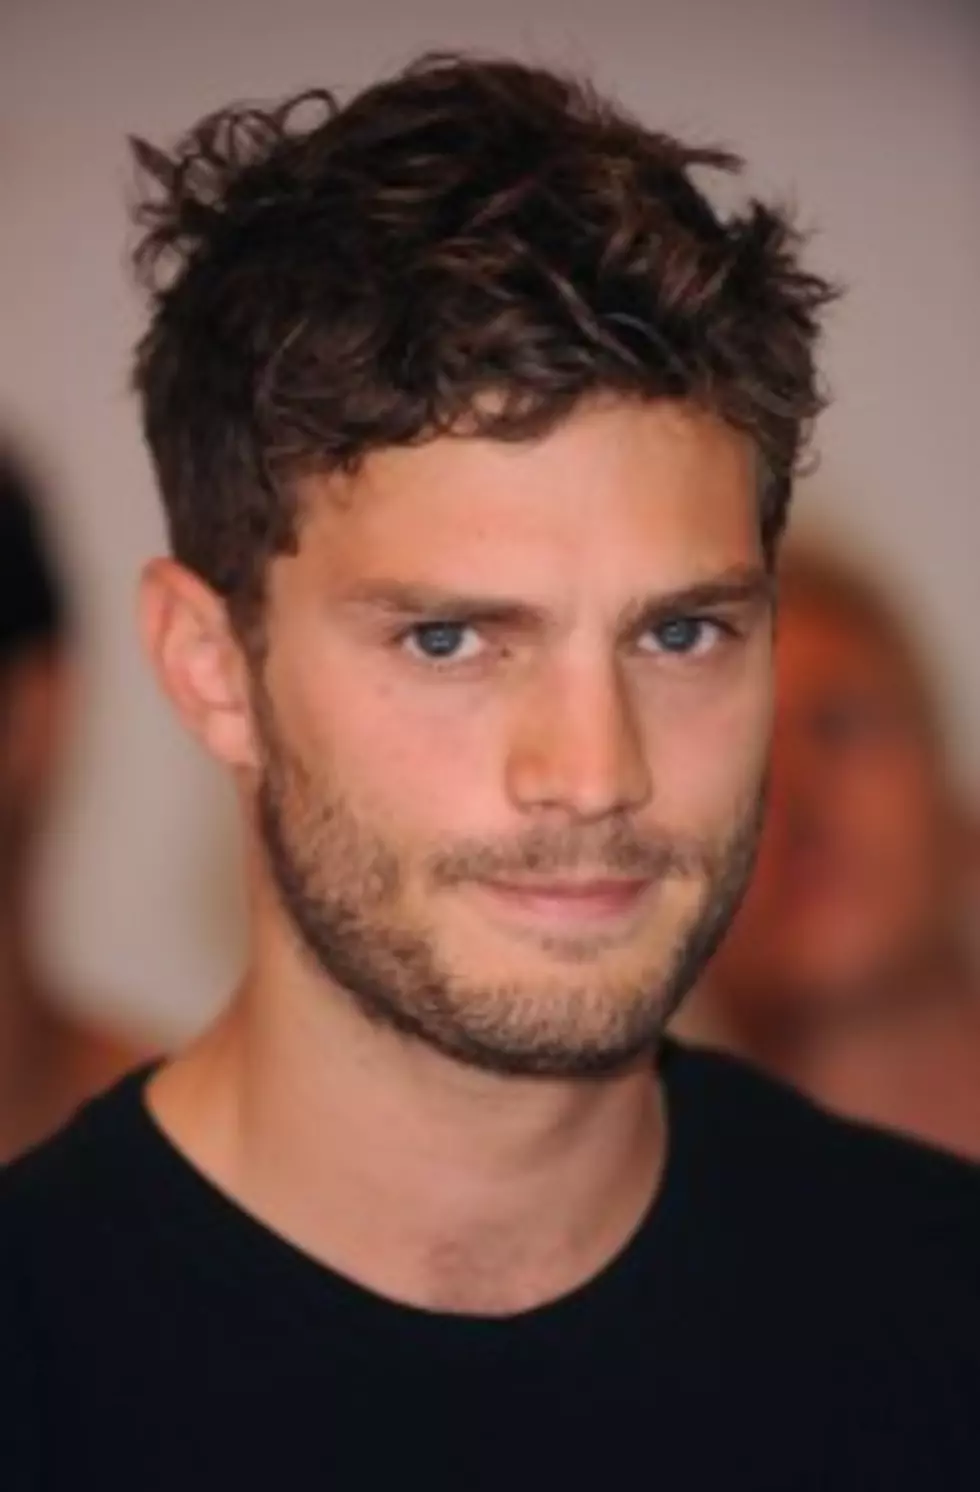 Jamie Dornan From ABC&#8217;s &#8220;Once Upon a Time&#8221; Will Star in &#8220;Fifty Shades of Grey&#8221;